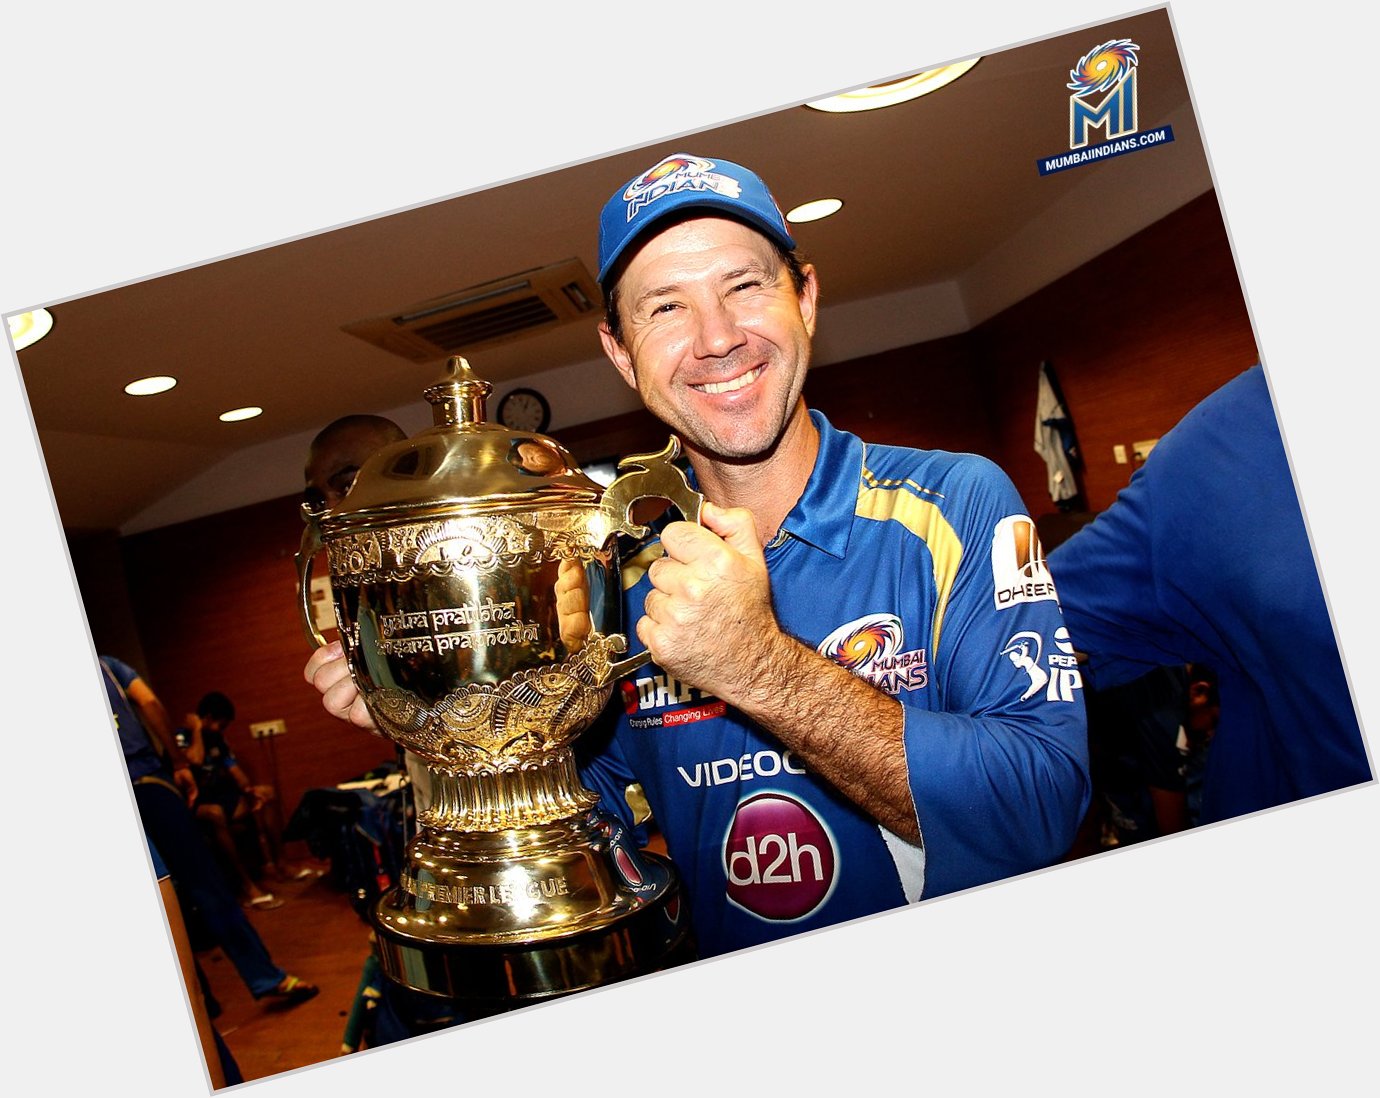 Happy Birthday Ricky Ponting! Australian Cricket owes you a lot, have a stunning one. 